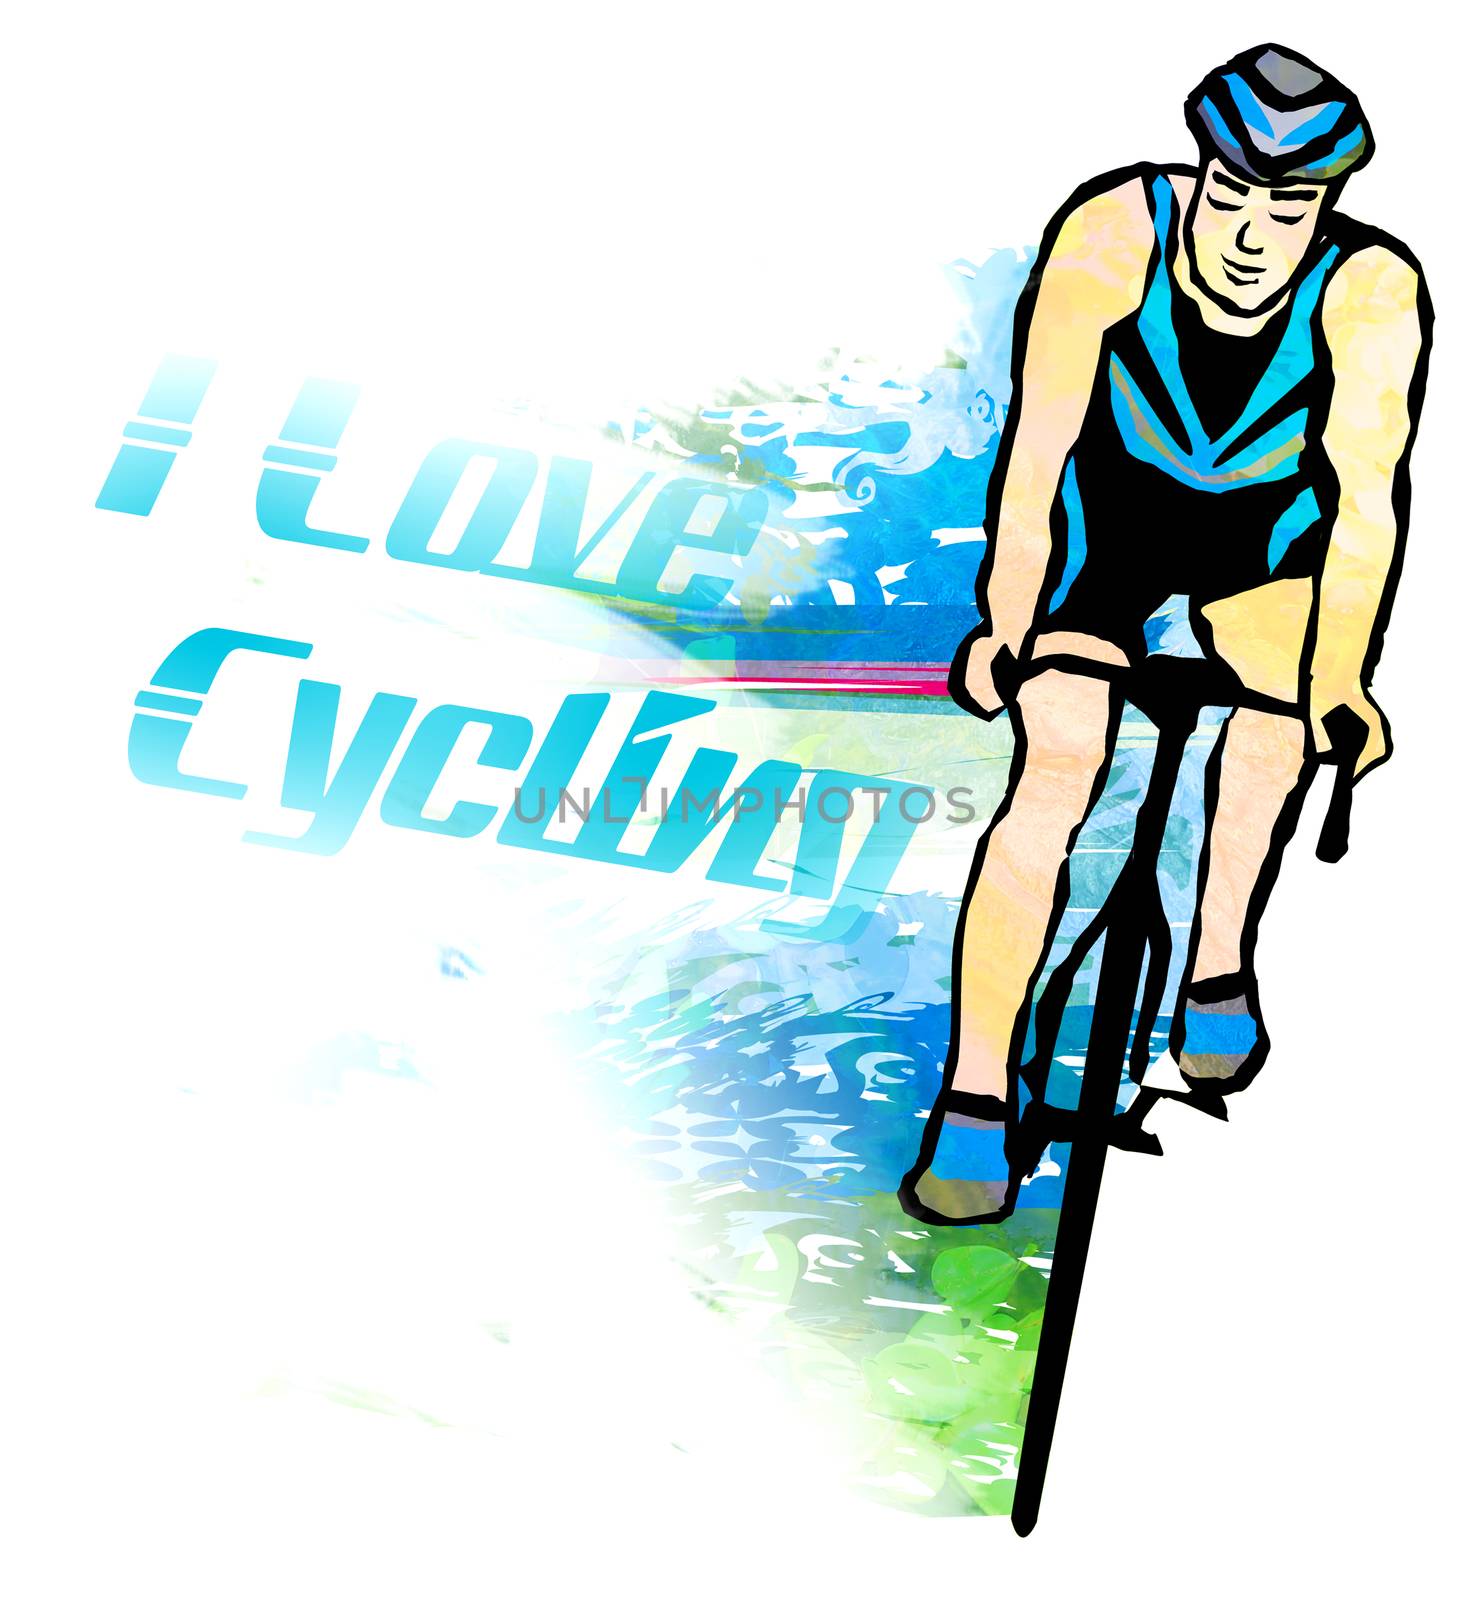 i love cycling banner by JackyBrown